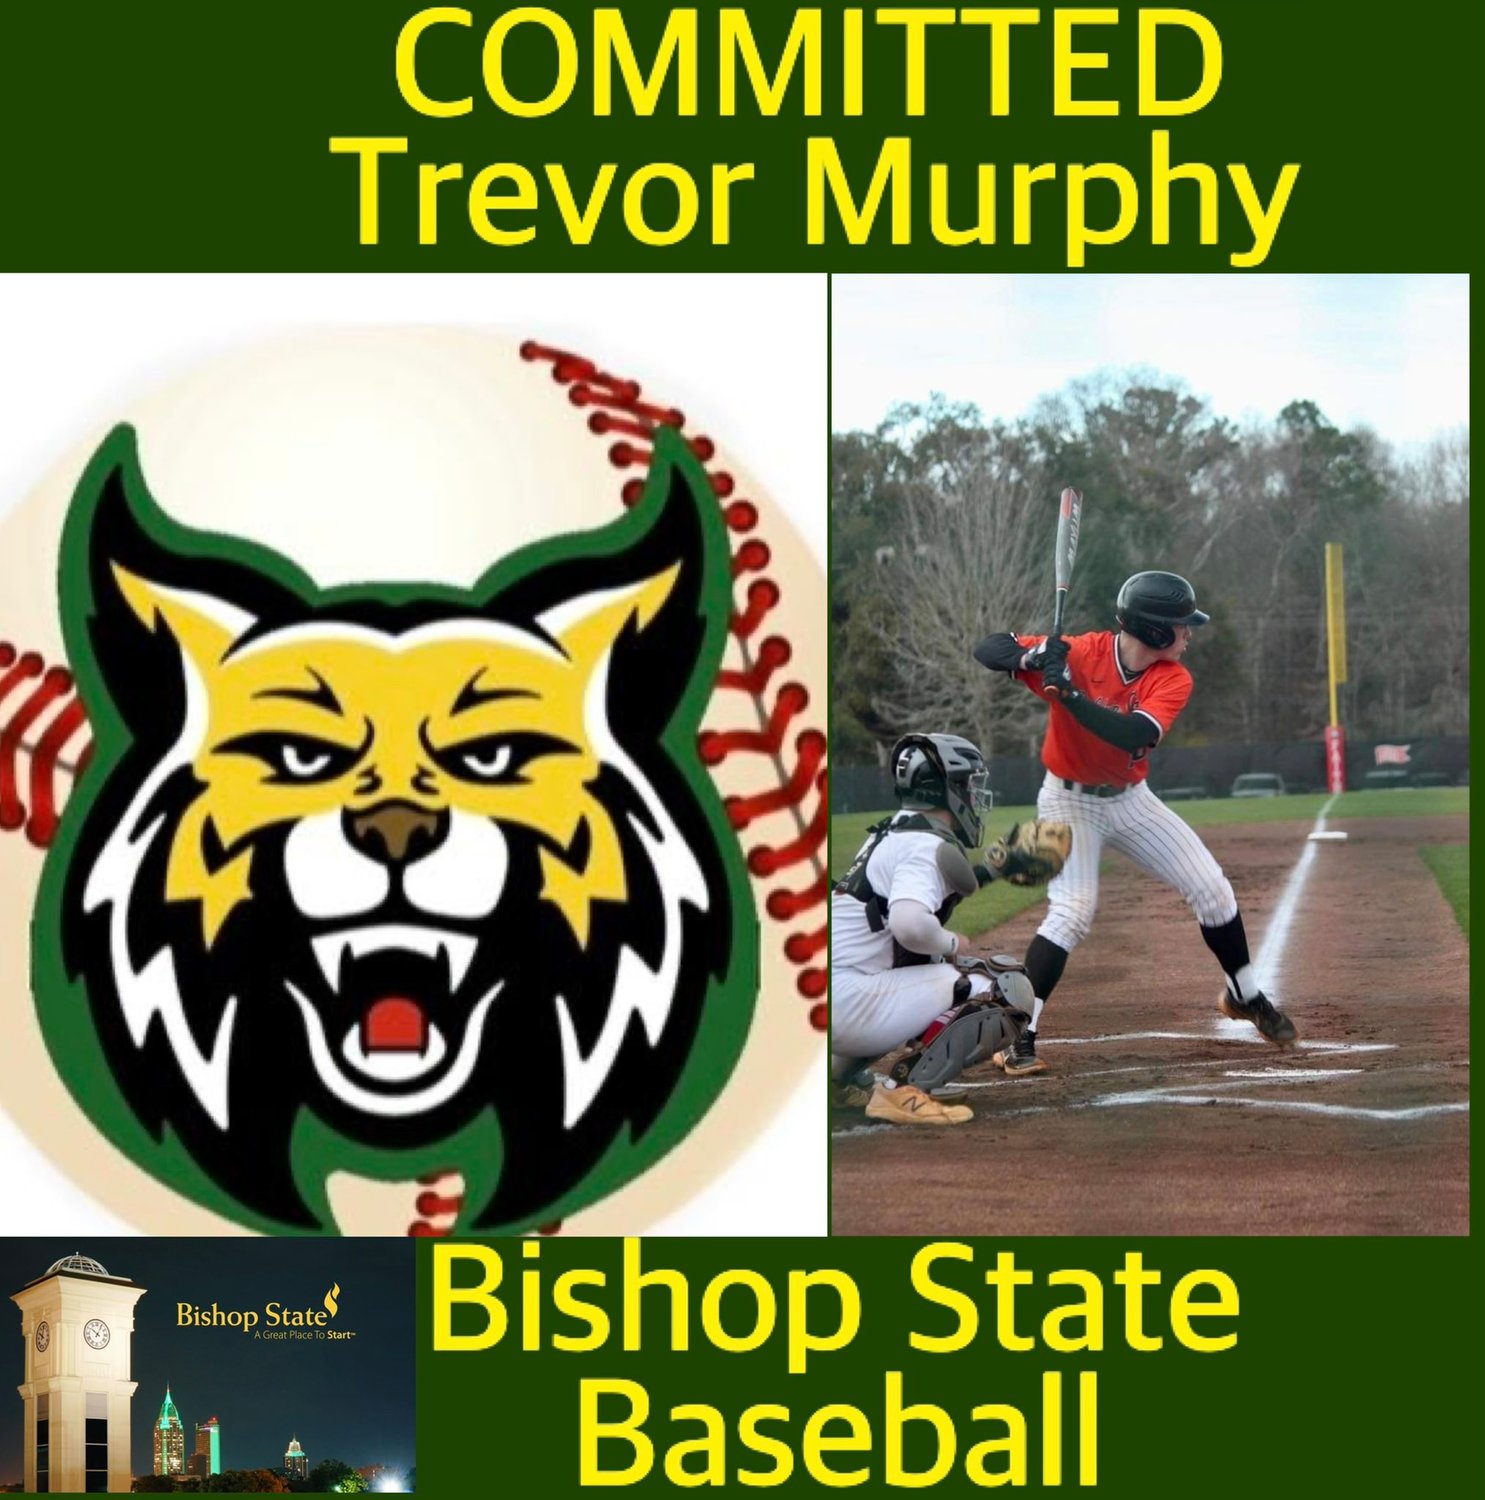 Trevor Murphy announced his commitment to the Bishop State baseball program Thursday, Oct. 13, after his final season with the Baldwin County Tigers. The Wildcats set program records for most wins, home runs and lowest ERA in their 2022 campaign.